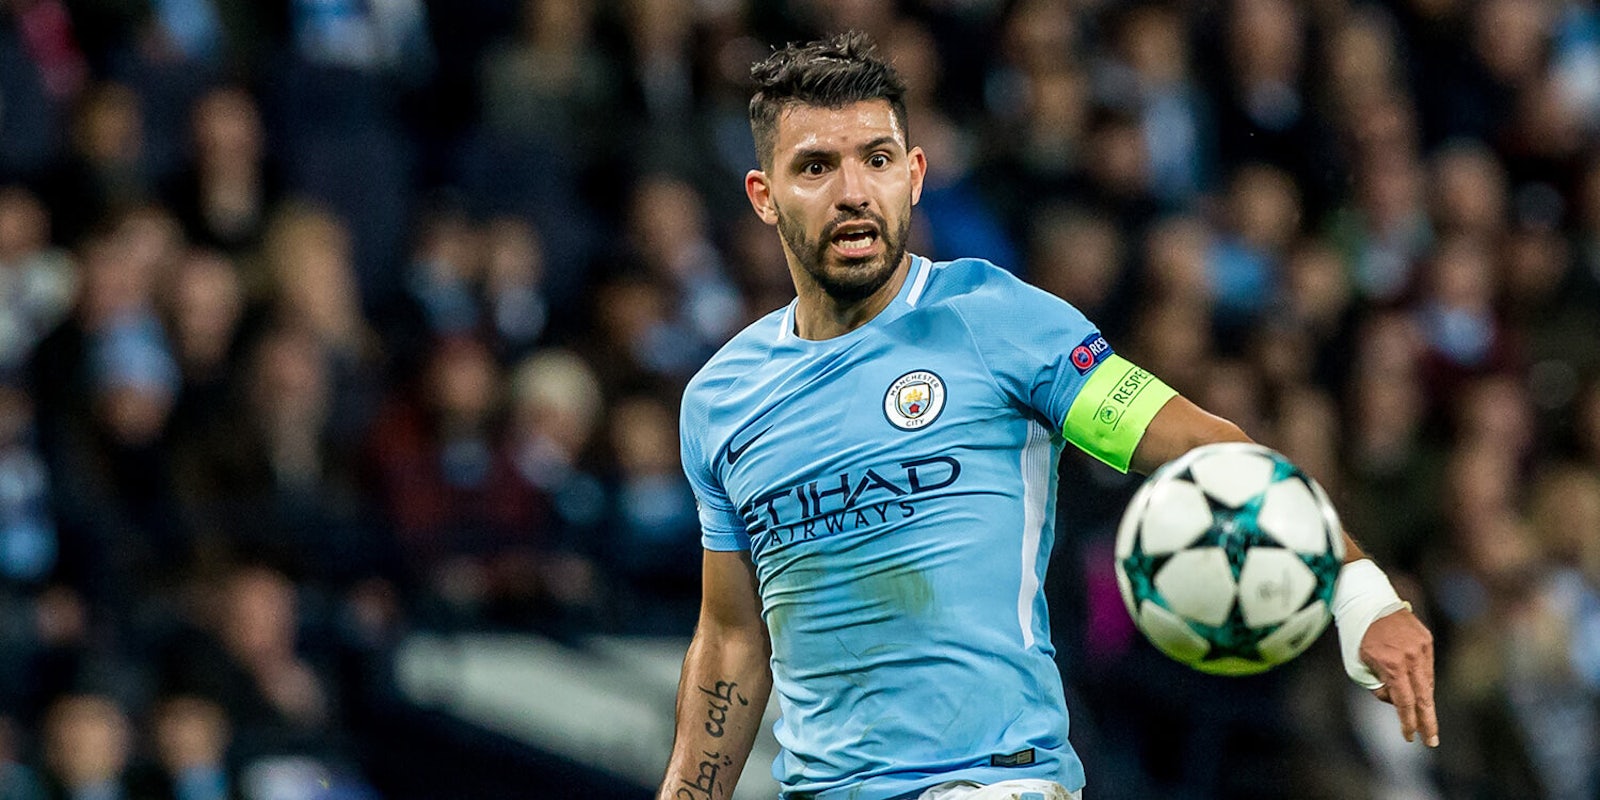 Sergio Aguero playing for Manchester City